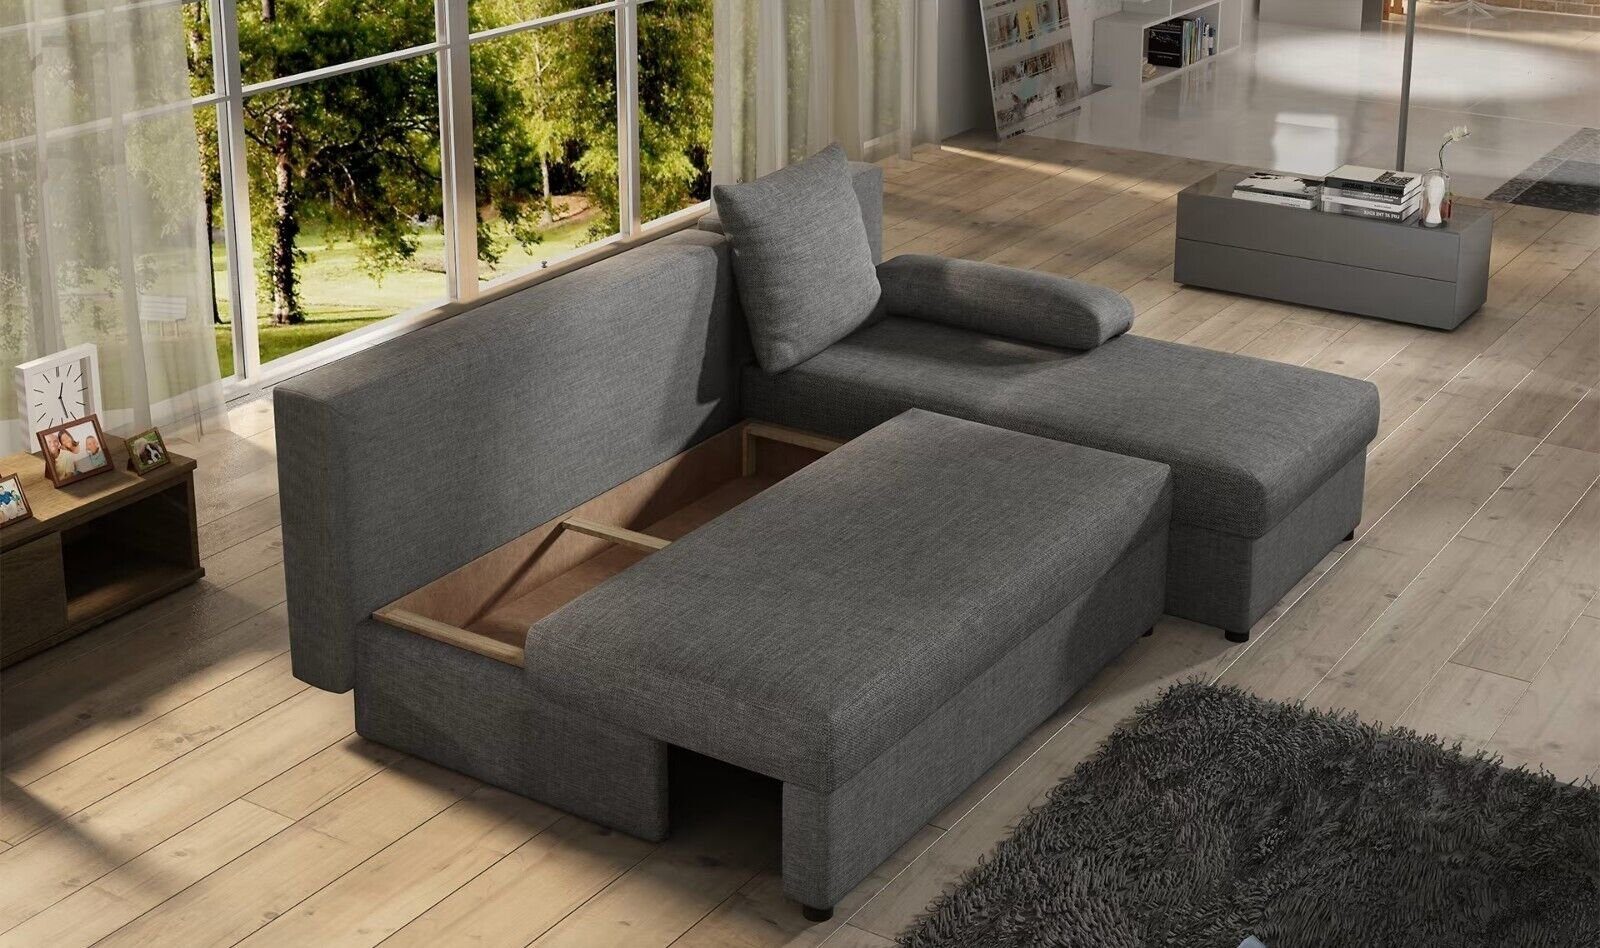 Ecksofa L-Form Sofort, Bettfunktion Polster Europe Schlafsofa JVmoebel Couch in Sofa Made Couch Grau Design